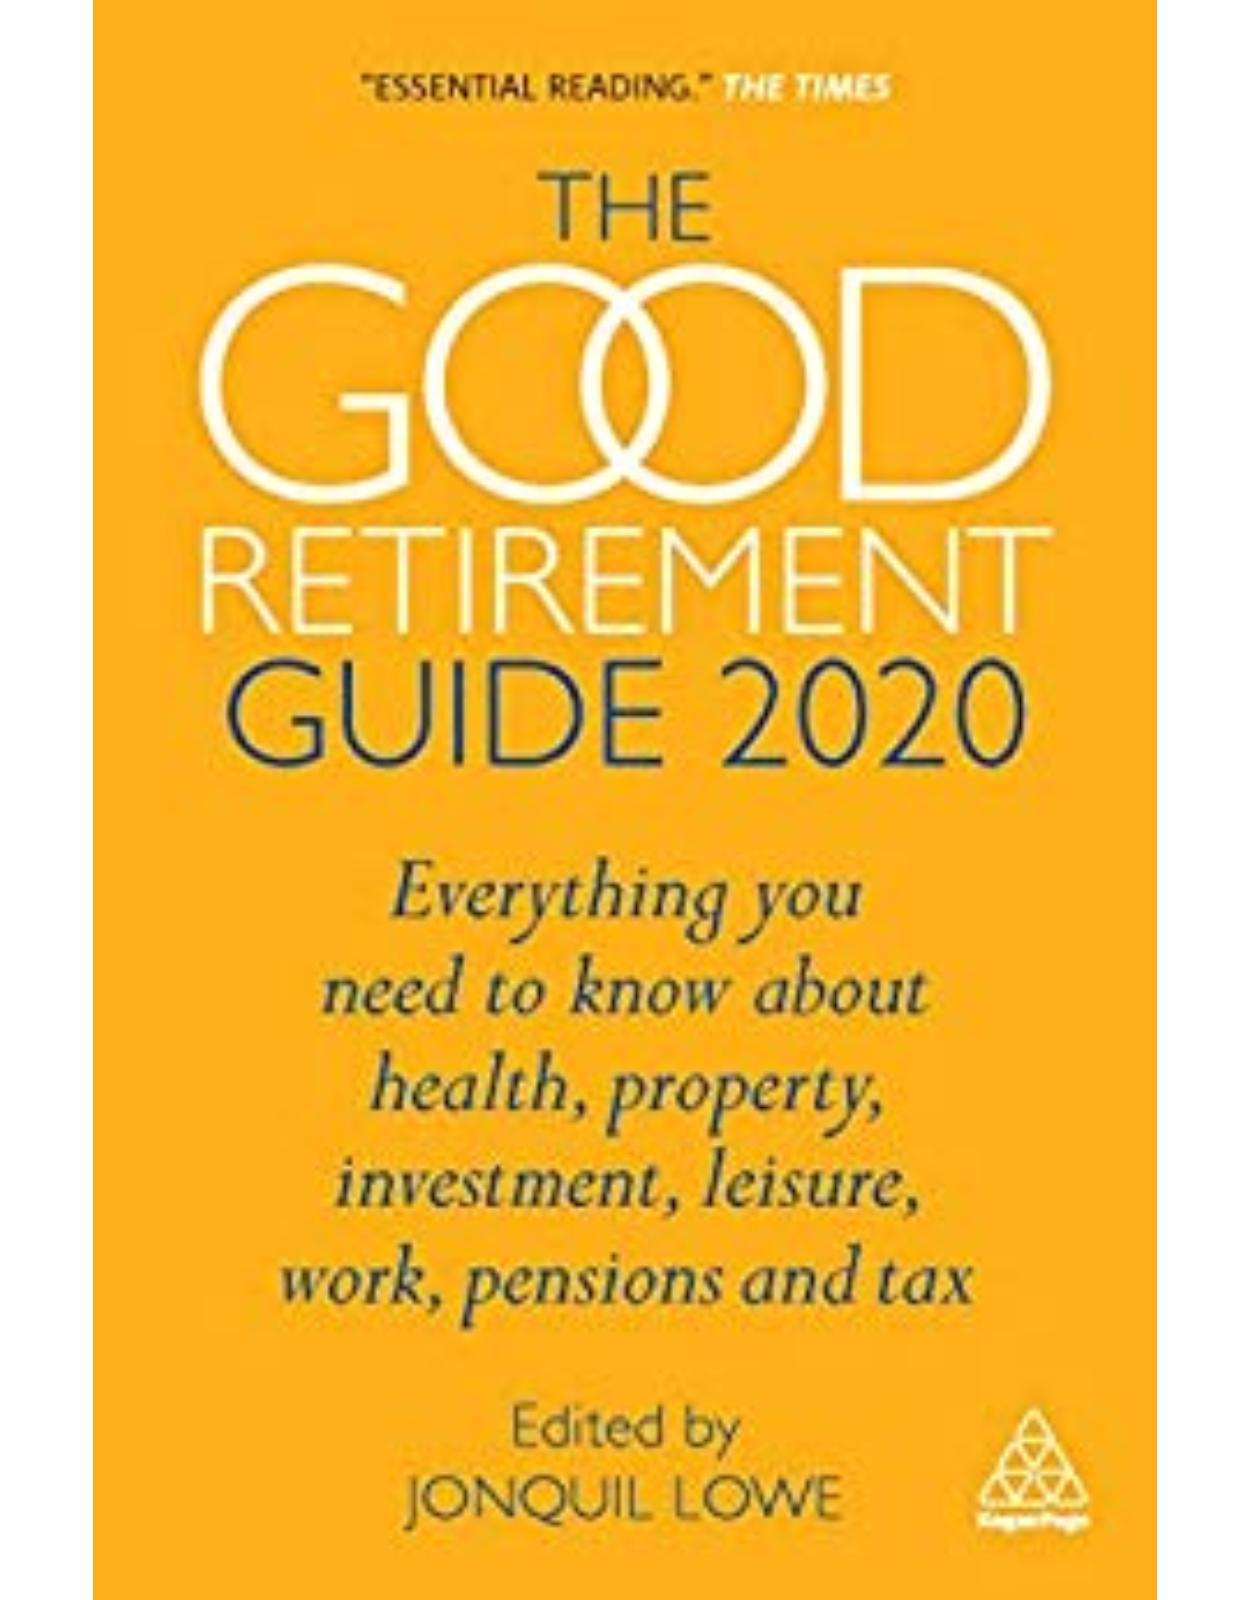 The Good Retirement Guide 2020